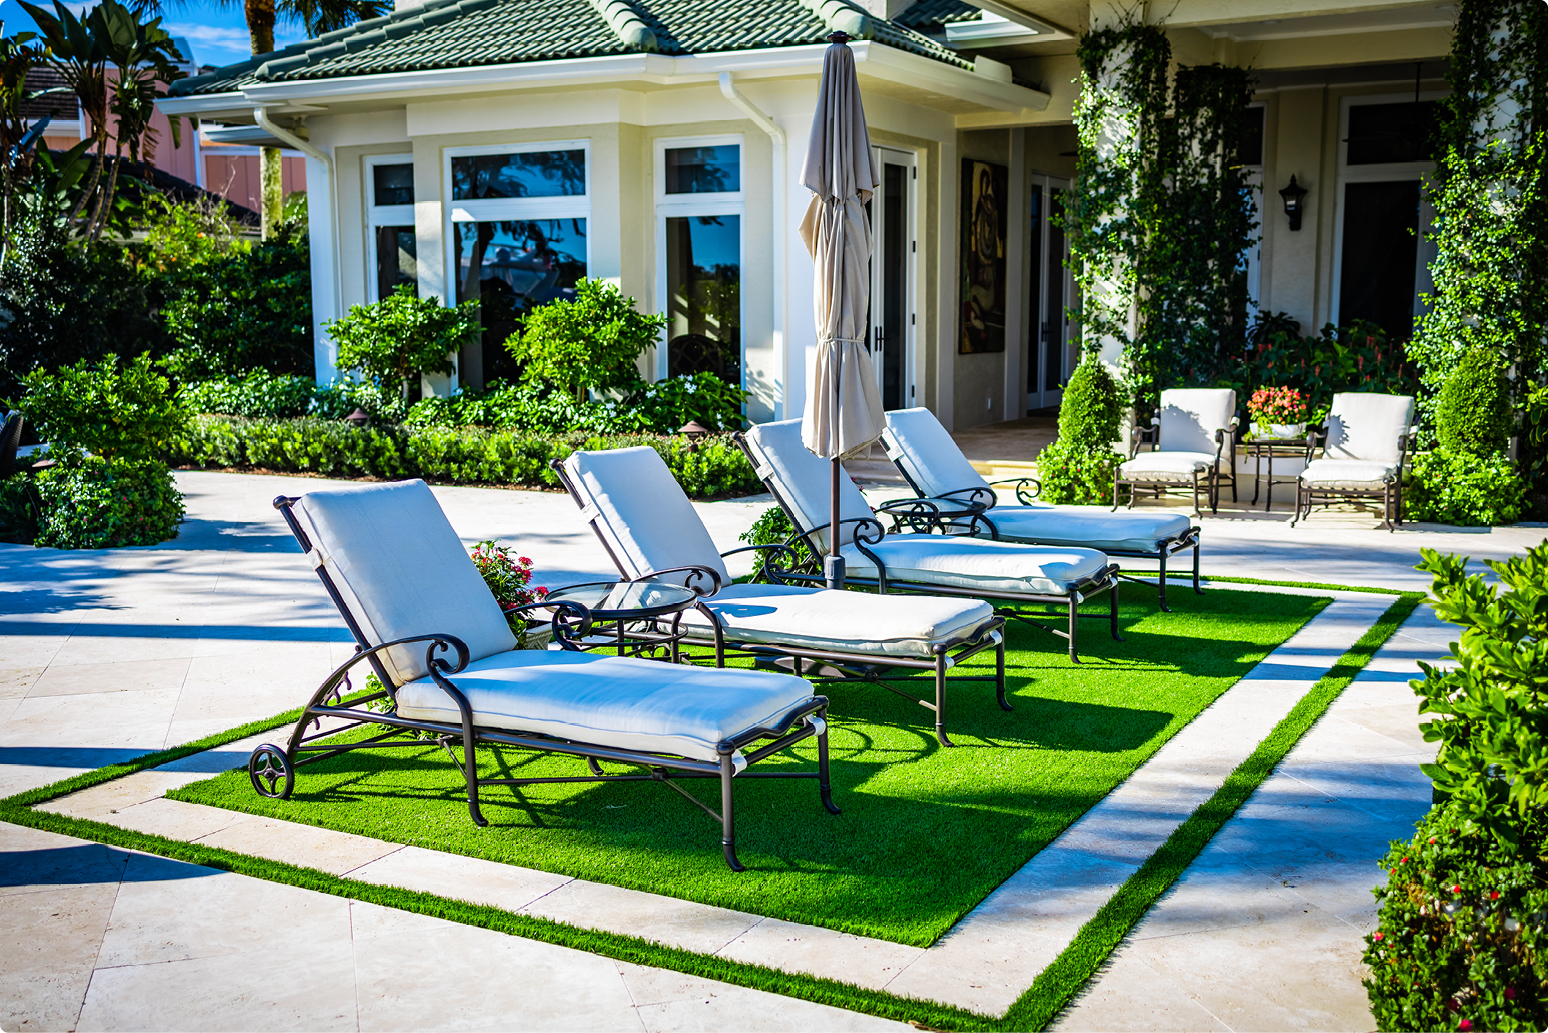 Lounge chairs on grass